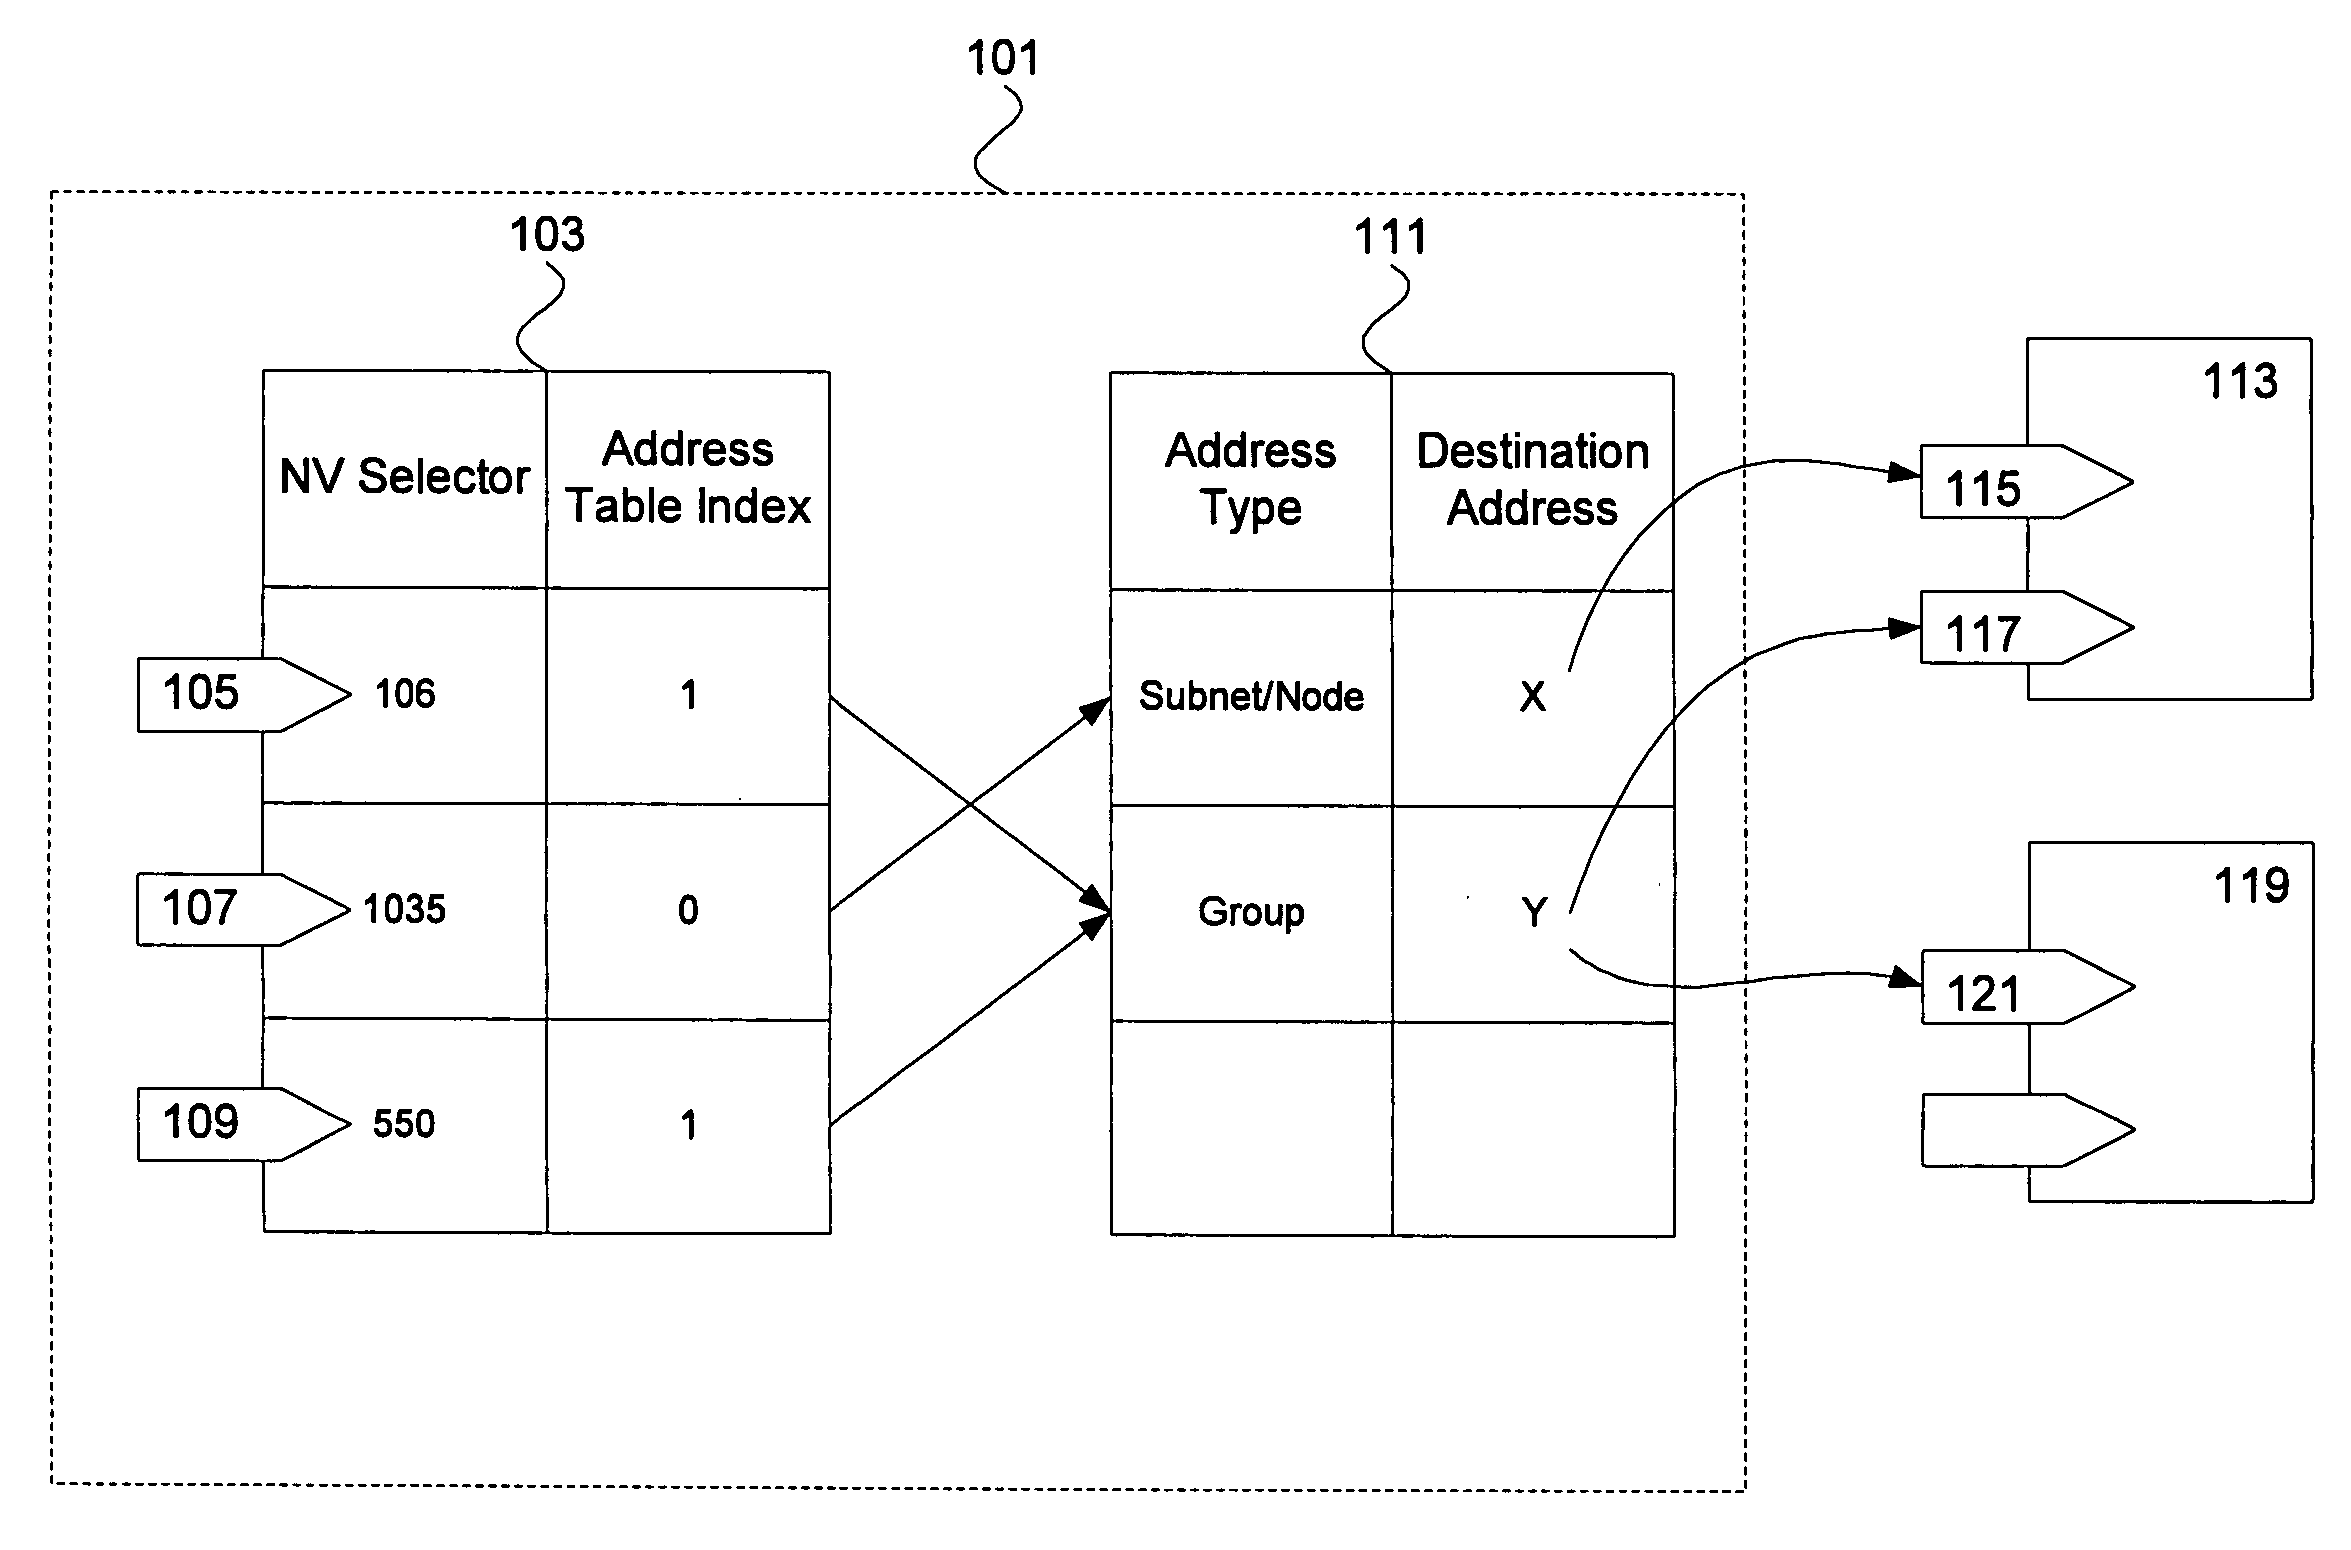 Simple installation of devices on a network